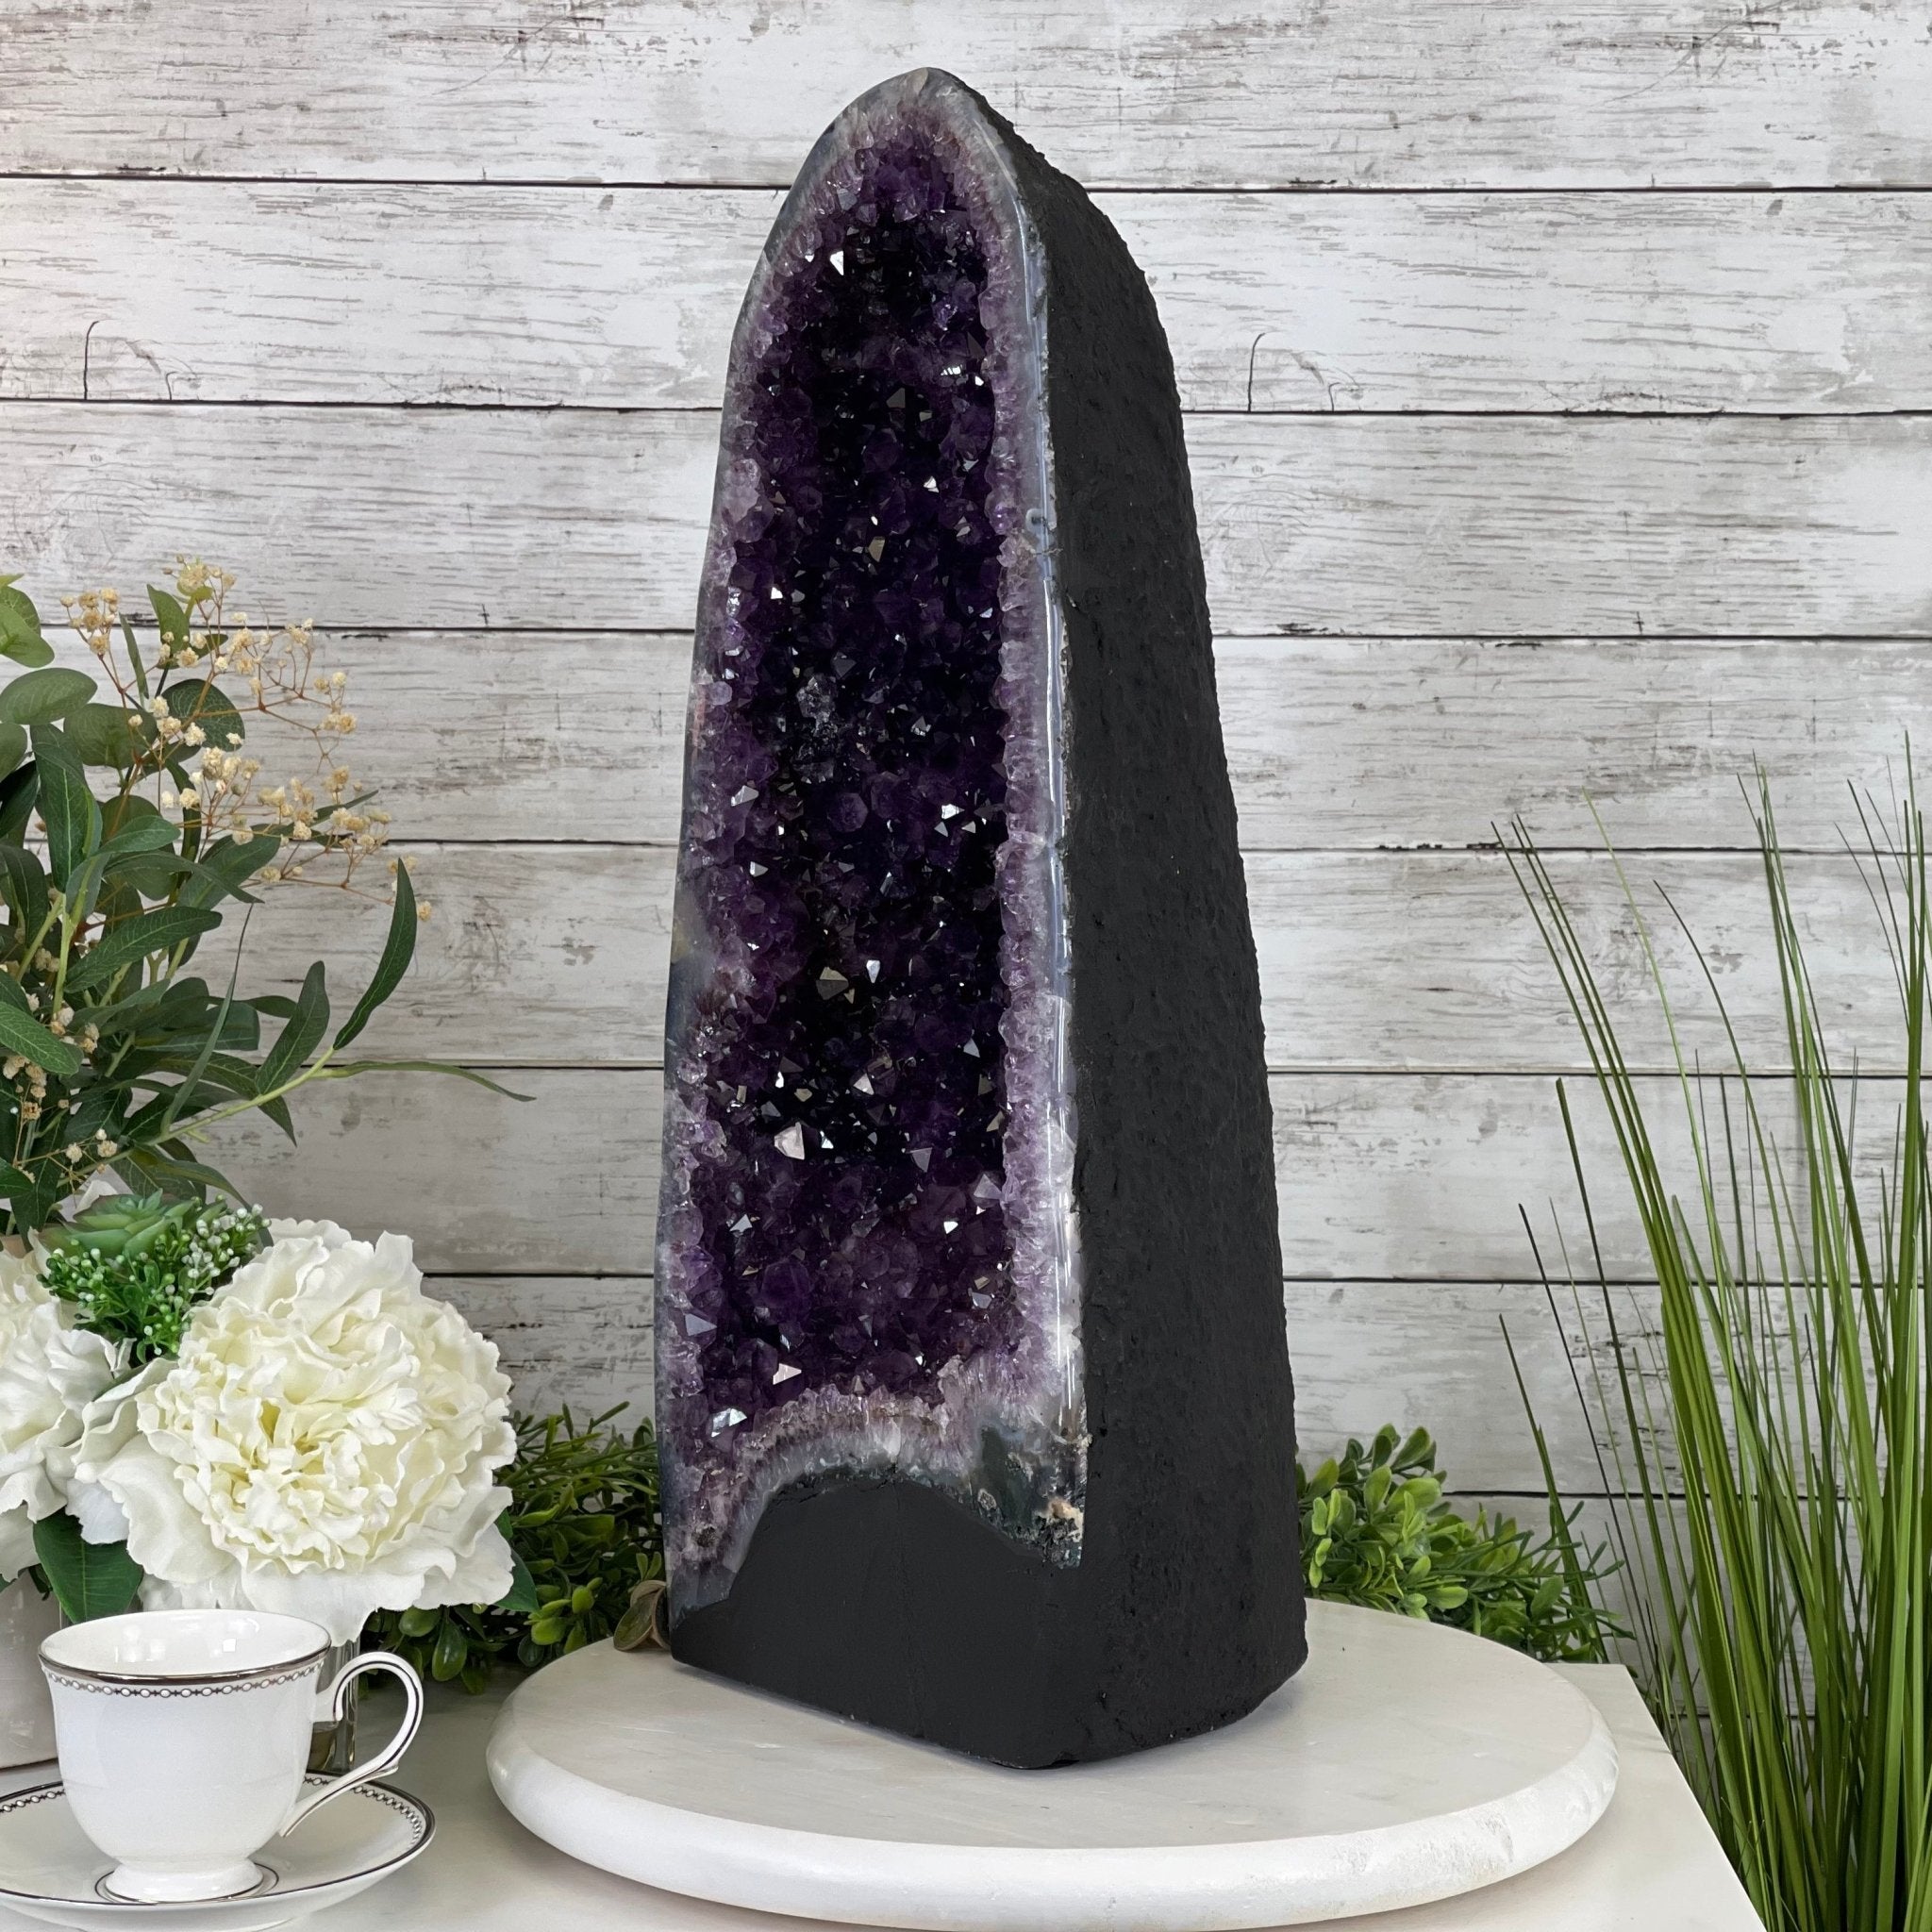 Extra Plus Quality Brazilian Amethyst Cathedral, 44.9 lbs & 21.5” tall Model #5601-1127 by Brazil Gems - Brazil GemsBrazil GemsExtra Plus Quality Brazilian Amethyst Cathedral, 44.9 lbs & 21.5” tall Model #5601-1127 by Brazil GemsCathedrals5601-1127